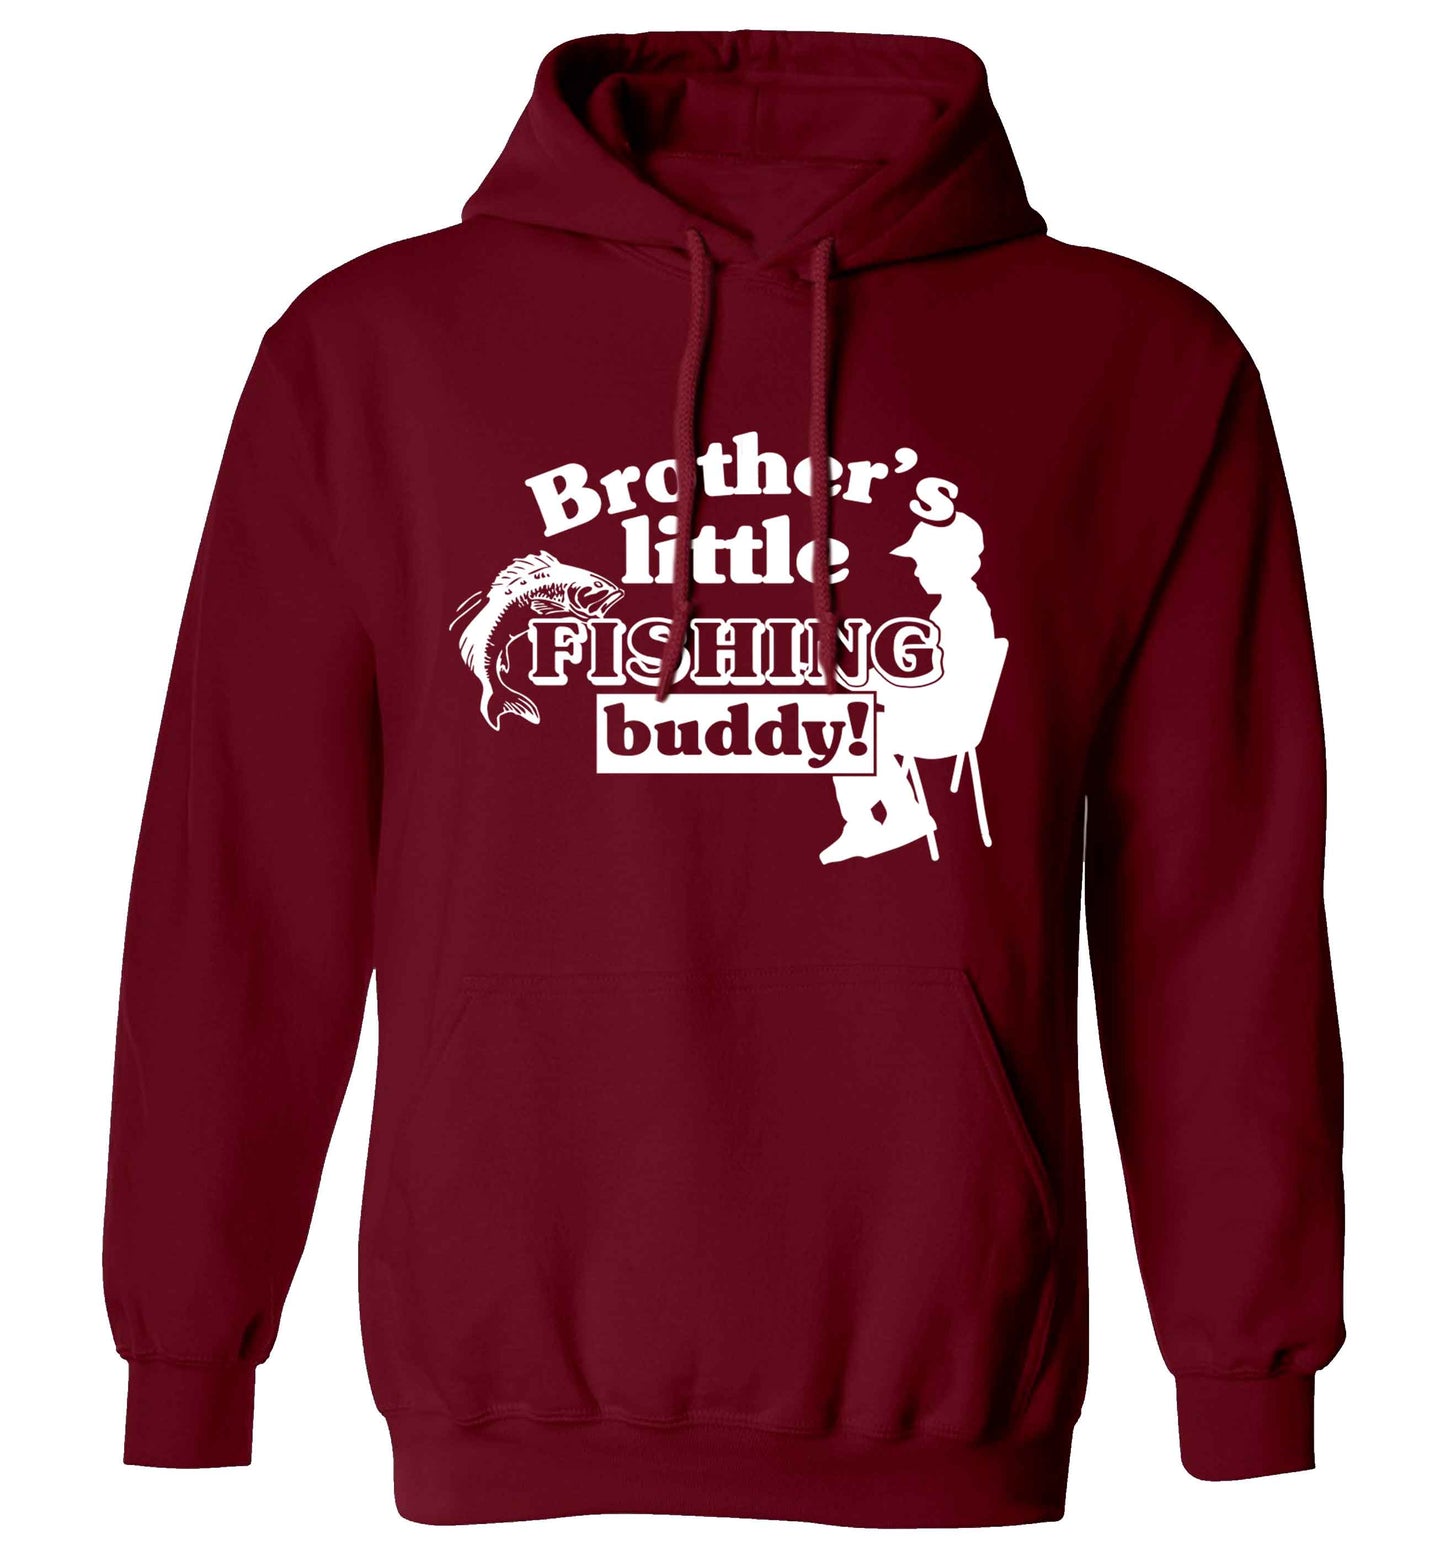 Brother's little fishing buddy adults unisex maroon hoodie 2XL